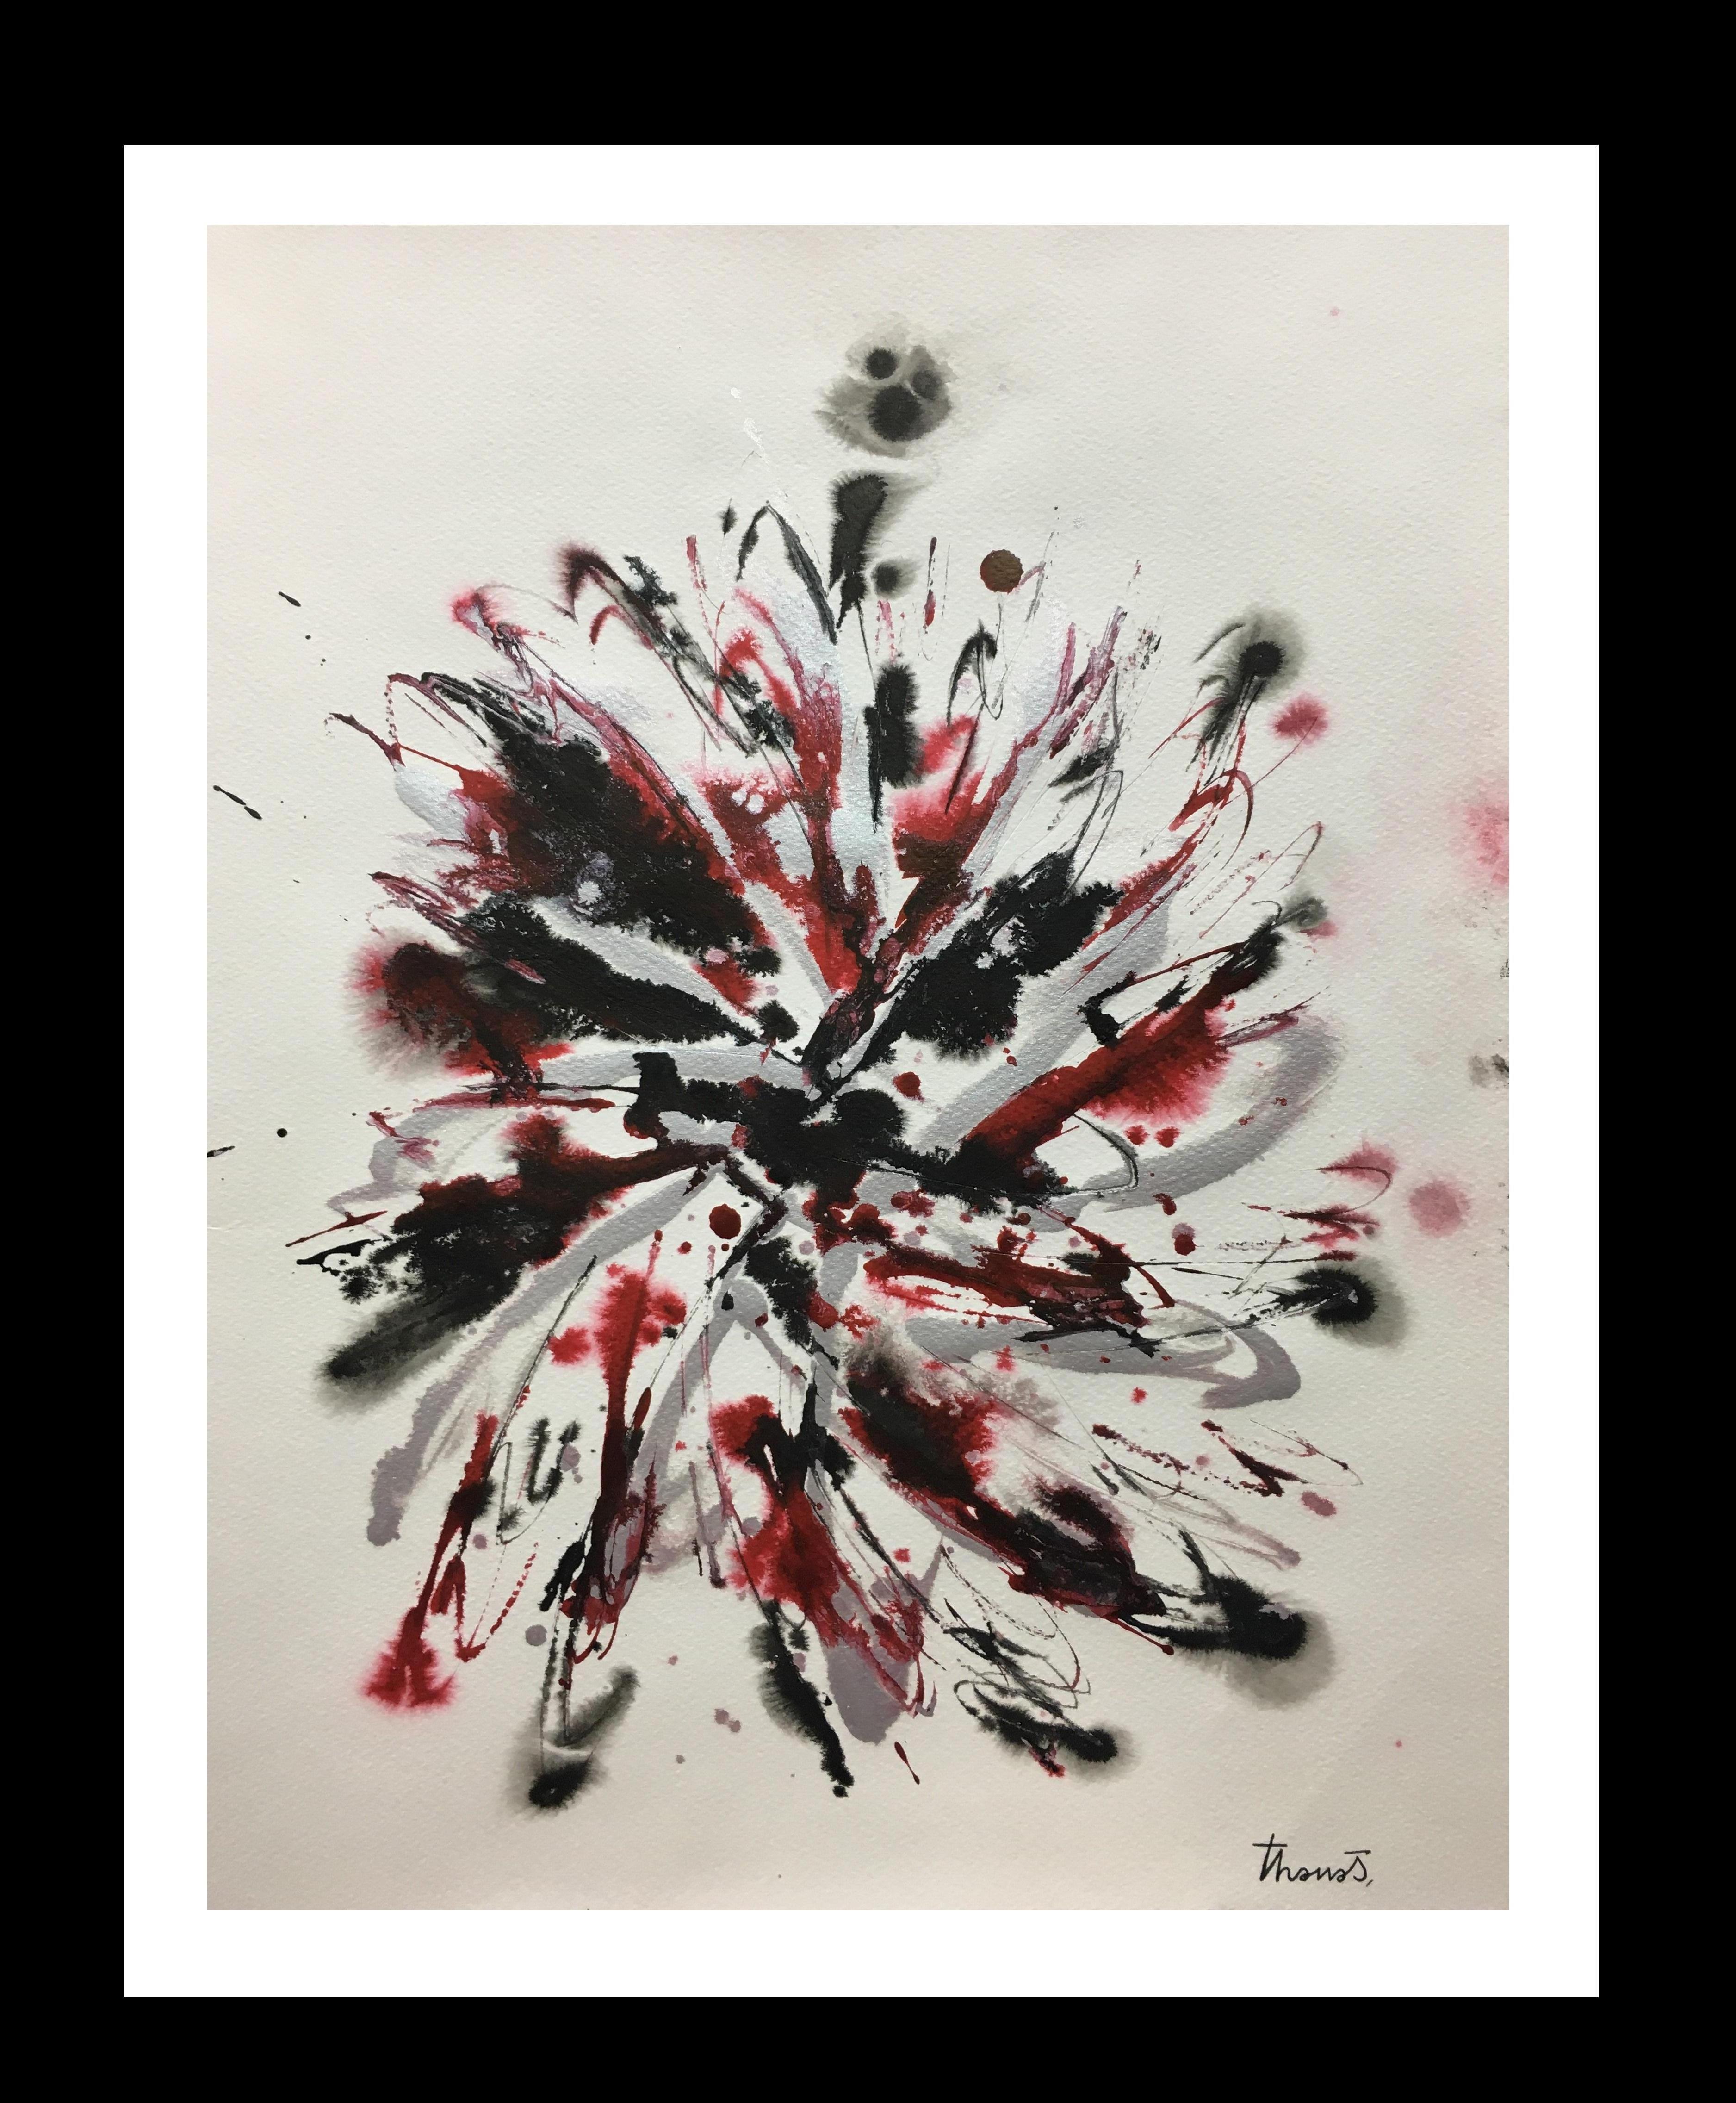 Josep THARRATS Abstract Painting - Tharrats. Vertical Red and Black. original abstract acrylic painting